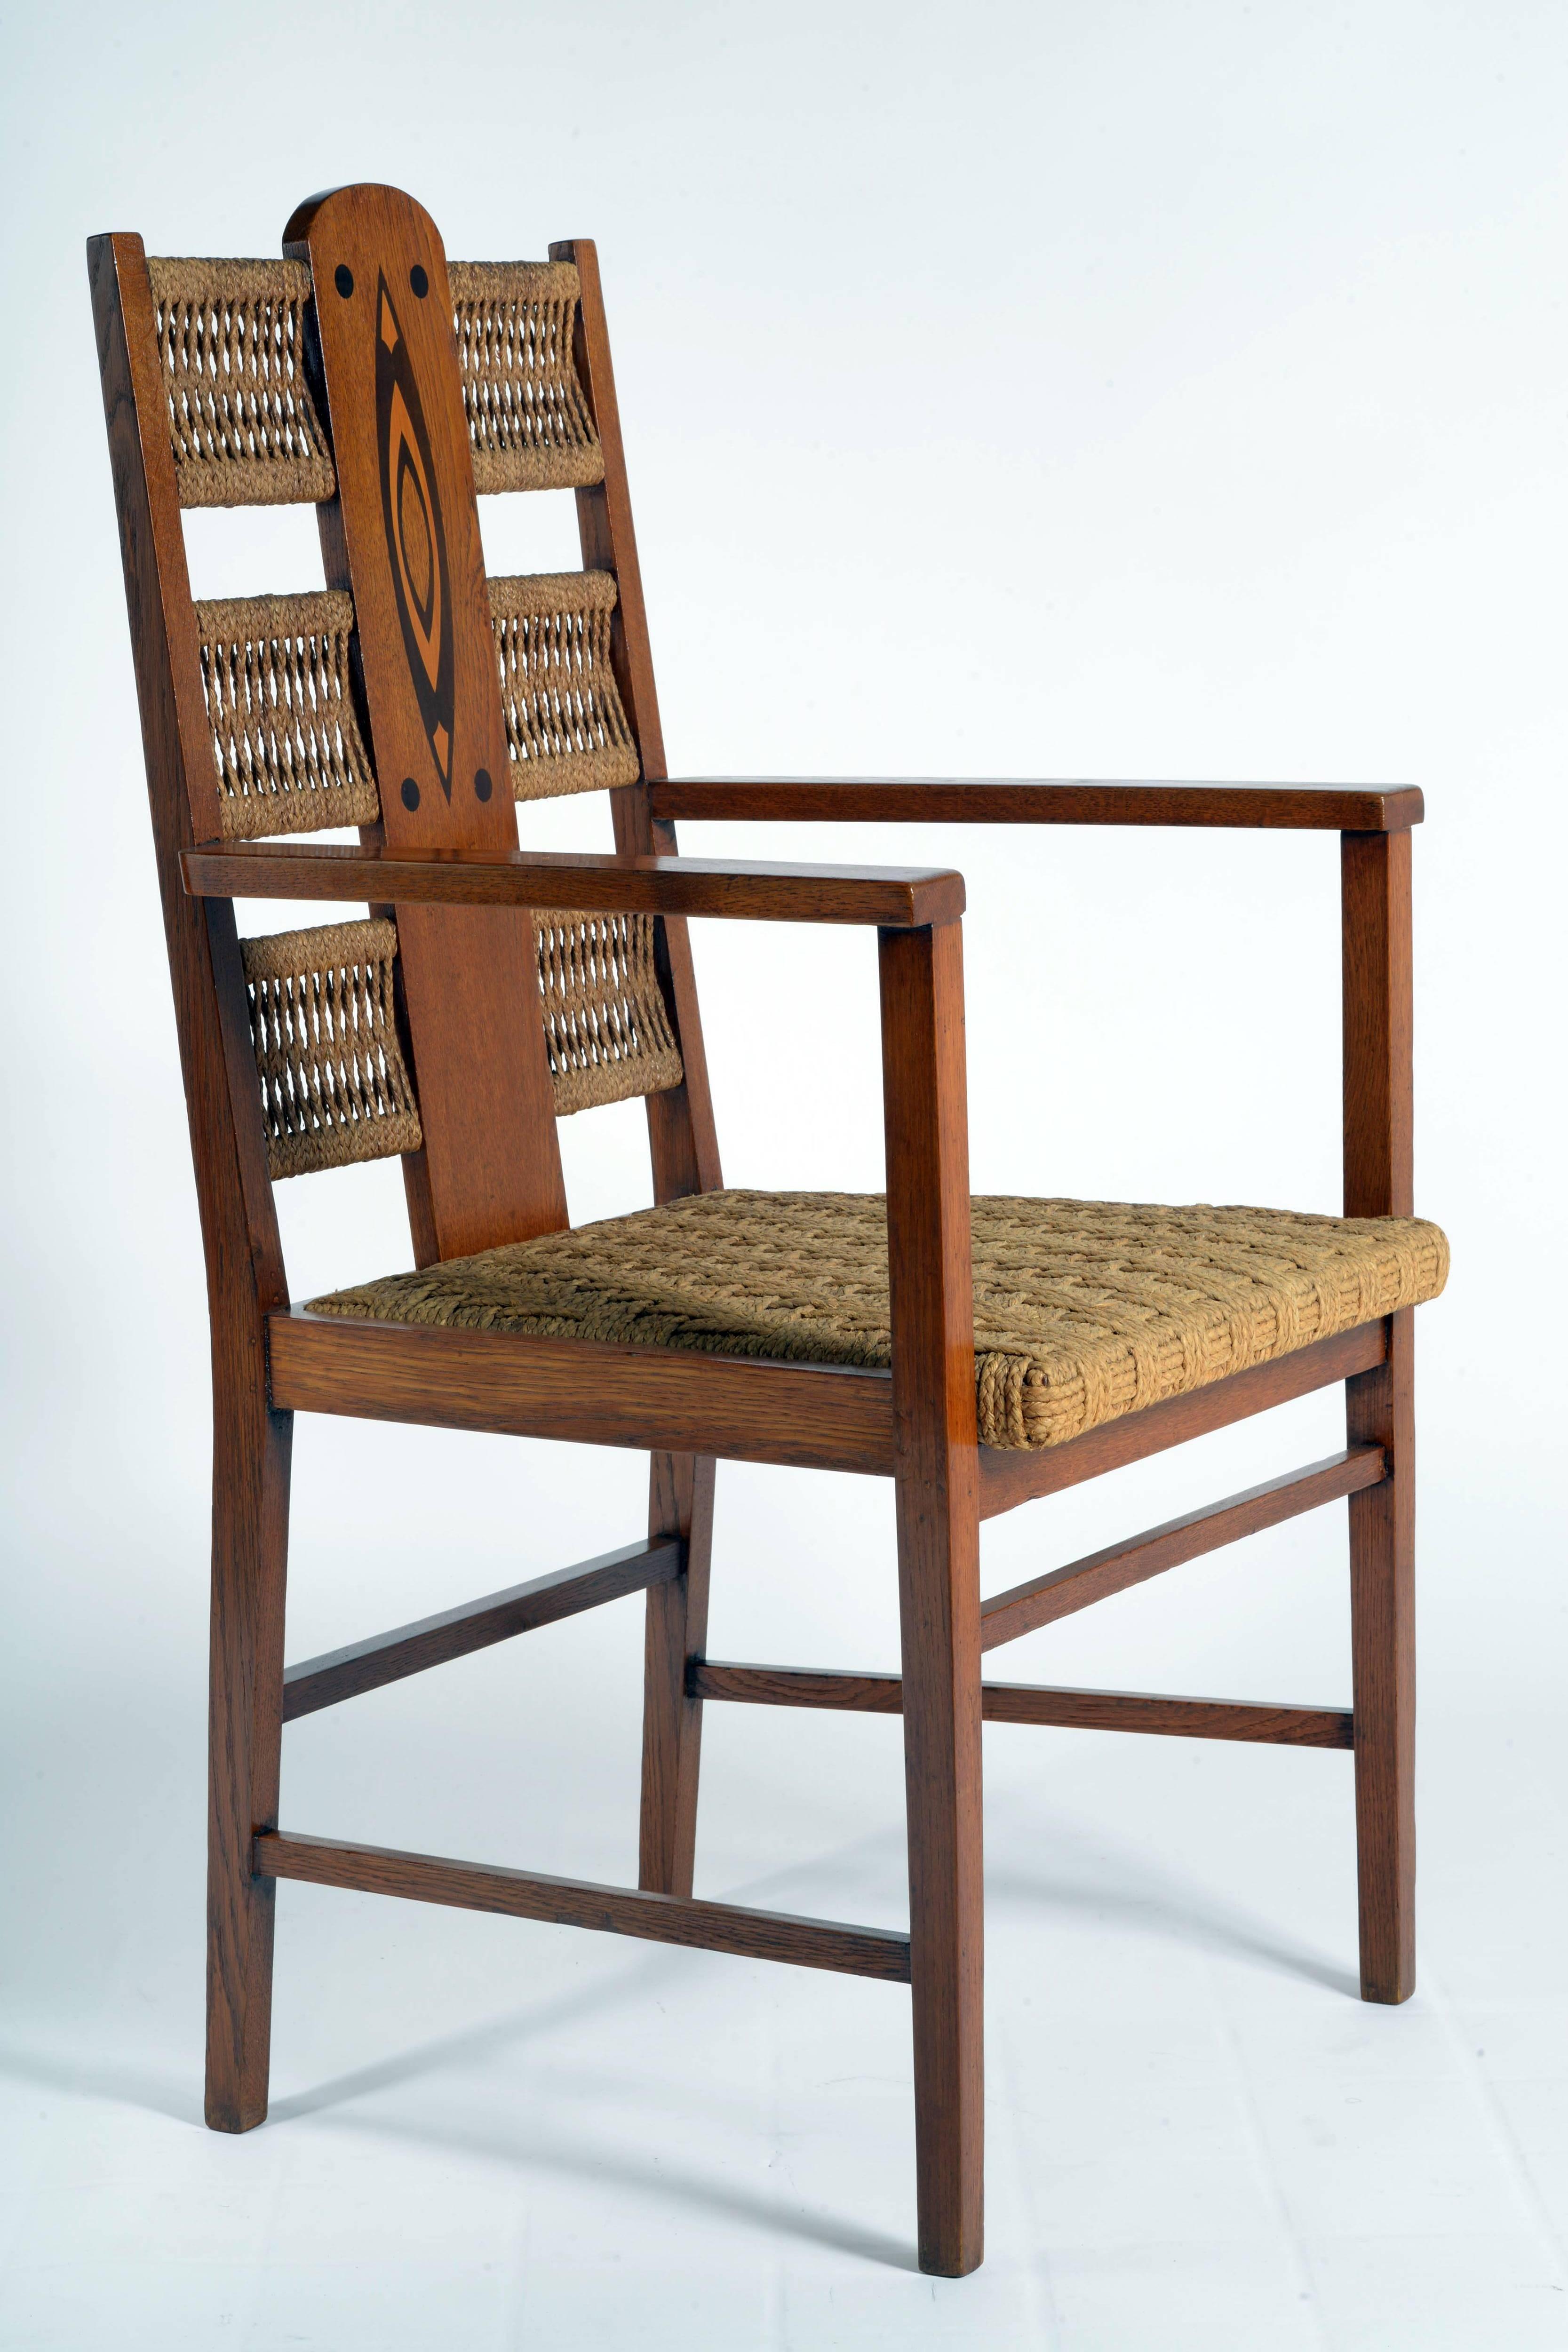 Beautiful pair of Art Nouveau armchairs with ebony and maples inlaid back and braided rope seat and back.
 
Franco Spicciani Pescia Lucca, Italy, 1905.

Bibliography reference: Il Mobile Liberty Italiano Editori Laterza Pag: 200.